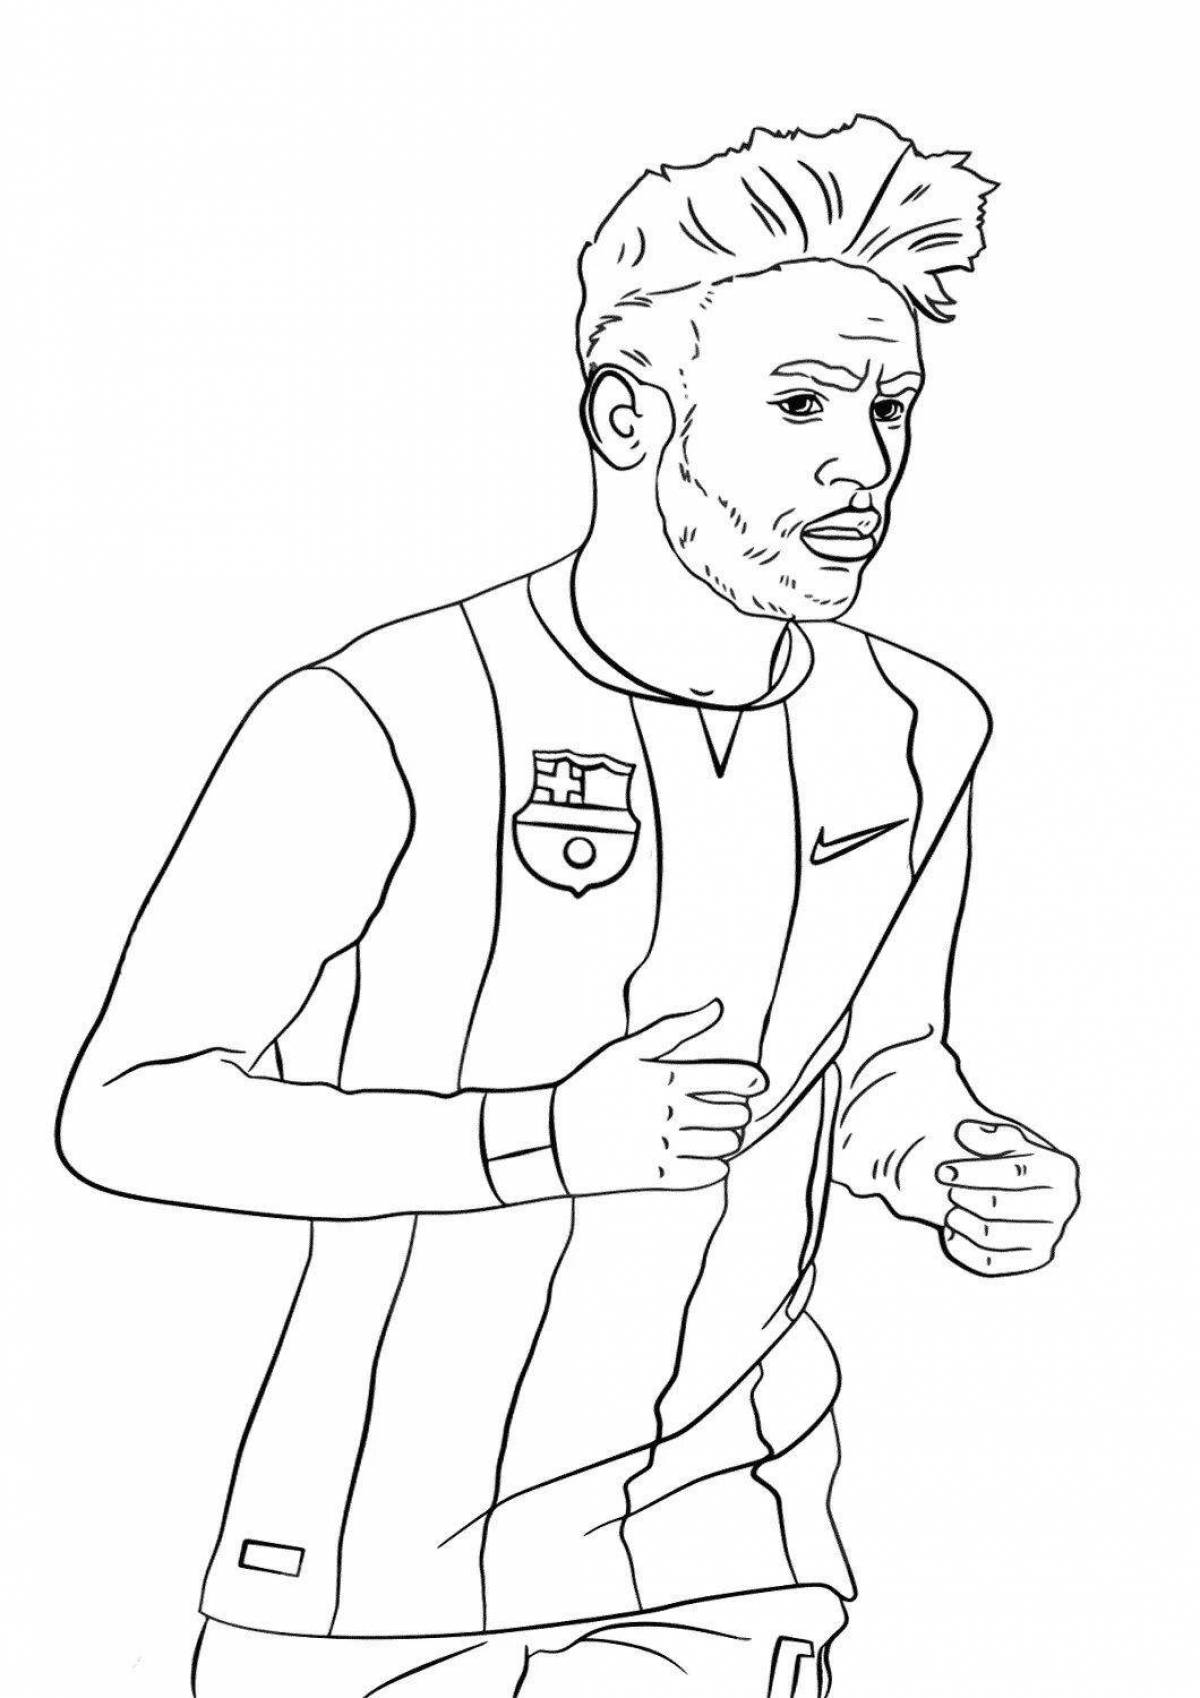 Leo messi's fancy coloring book